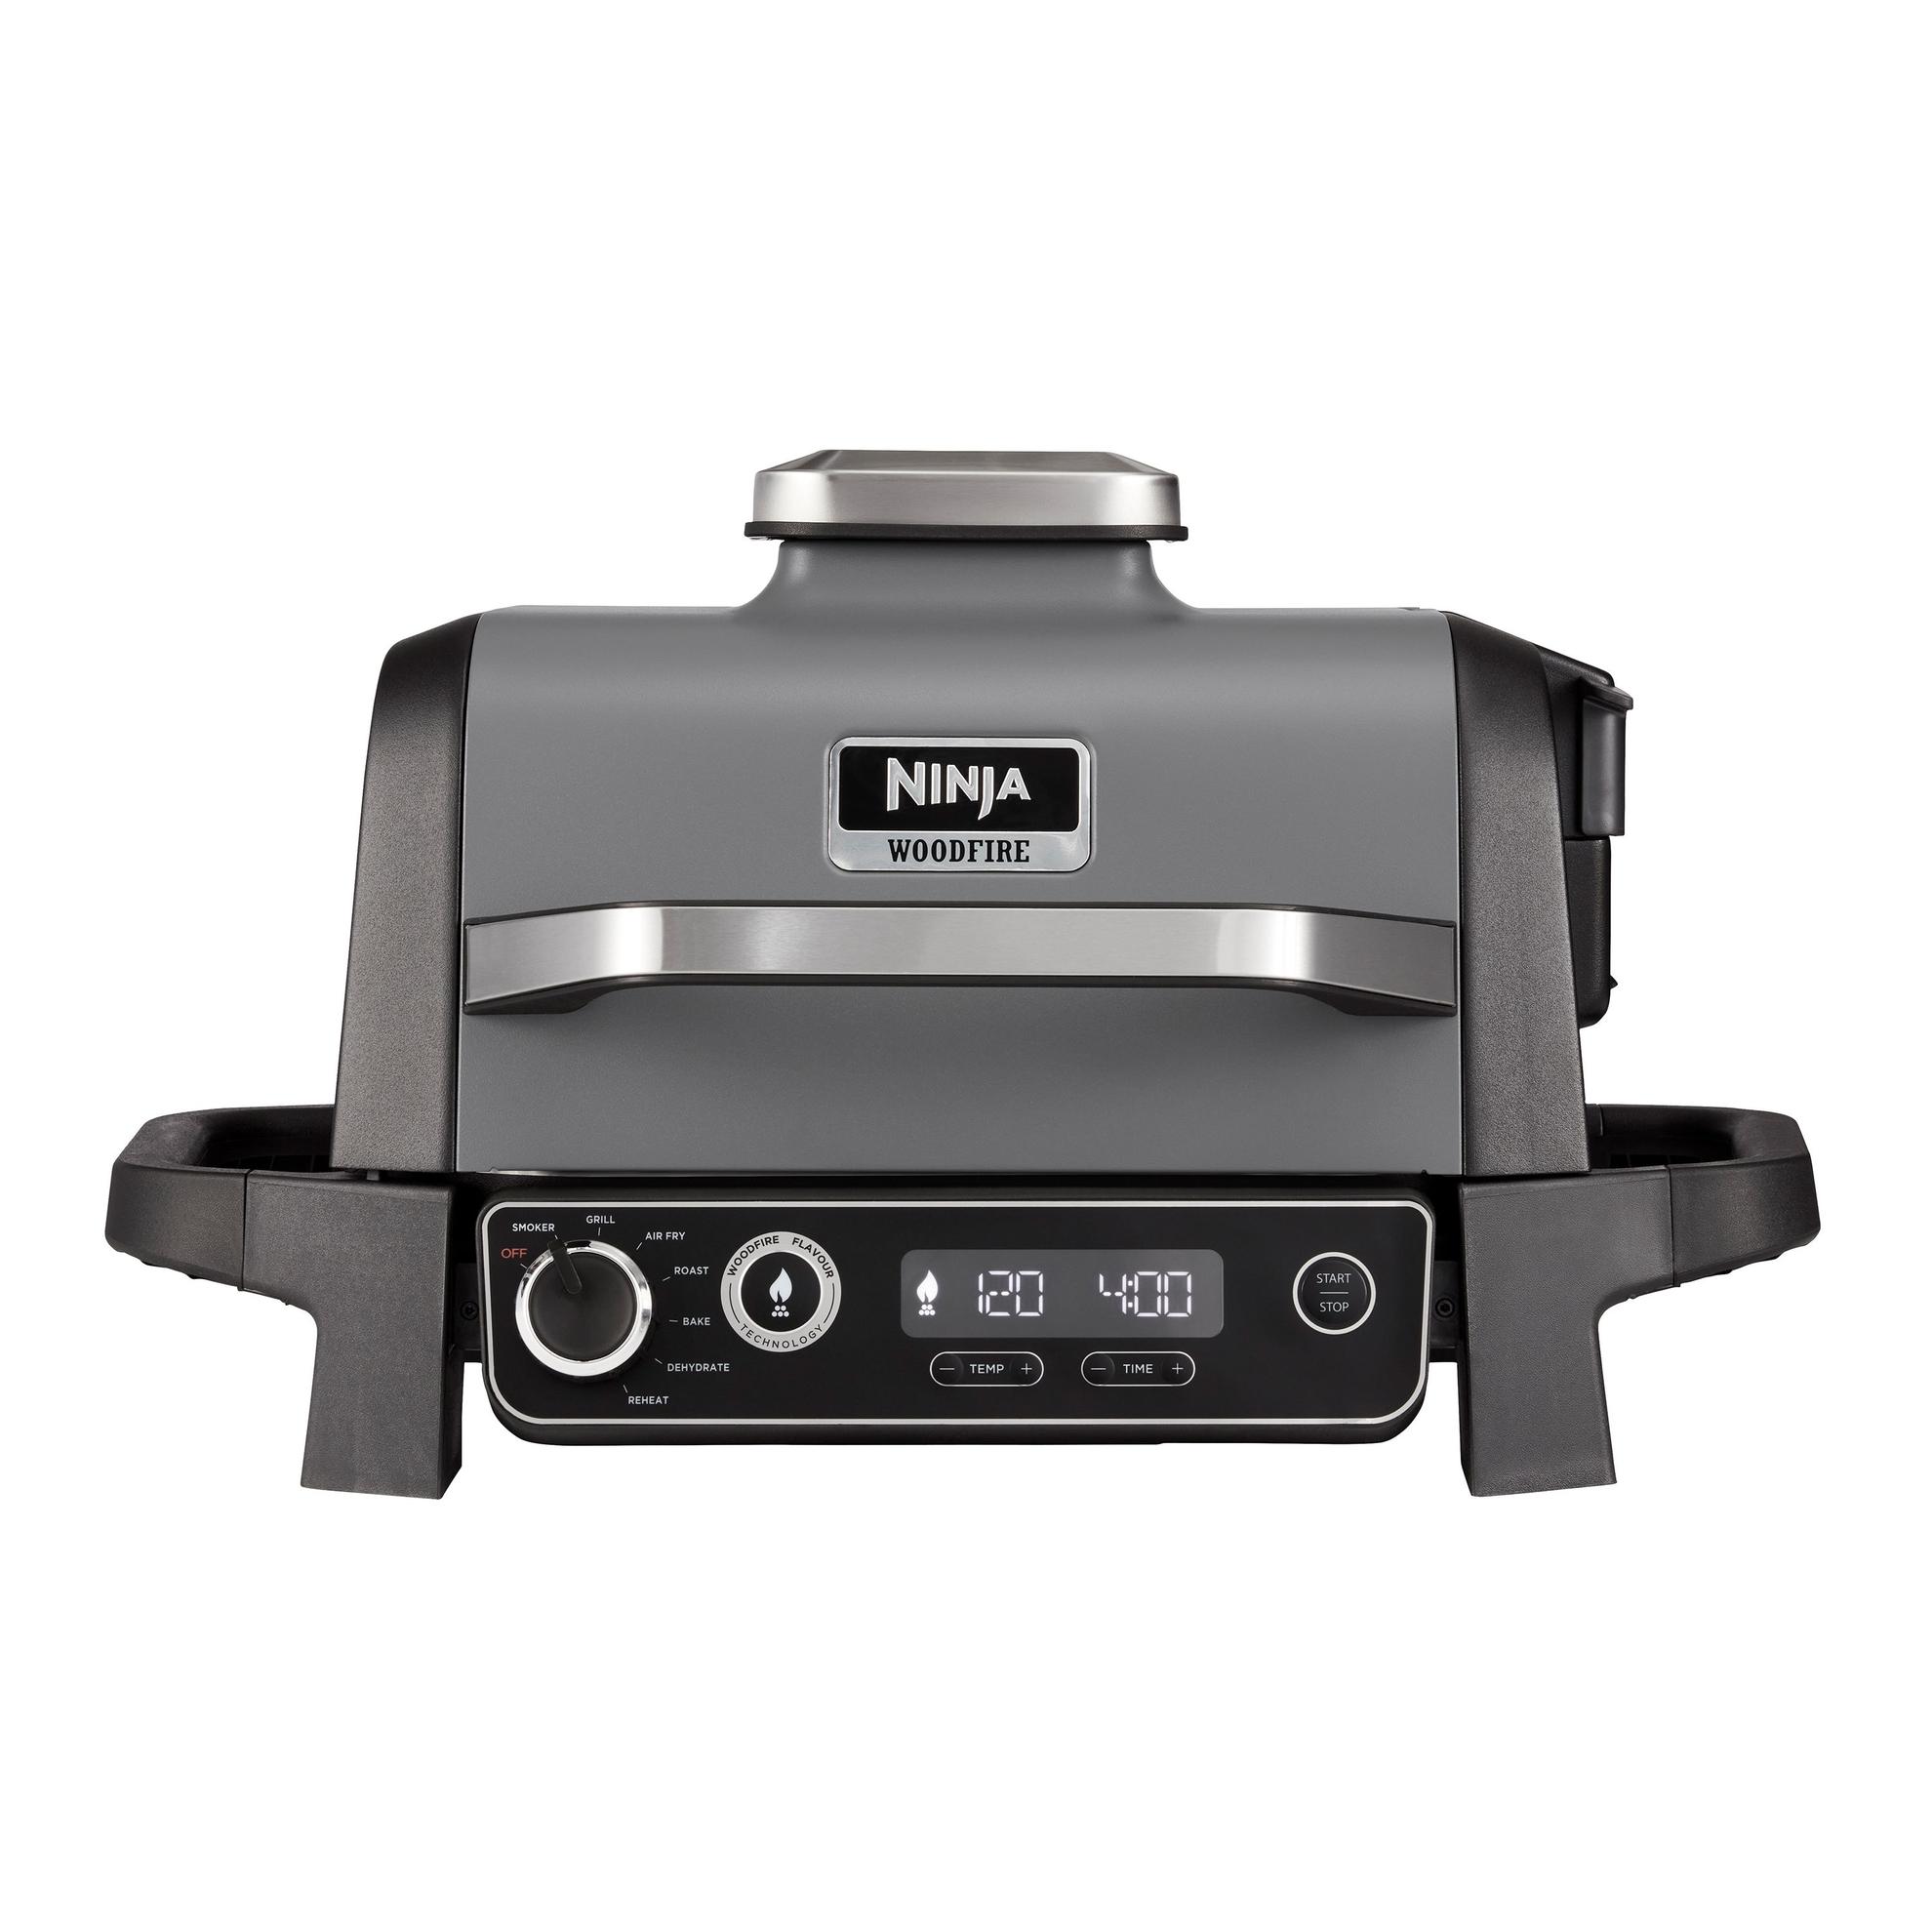 Ninja Woodfire Electric Barbecue Grill & smoker OG701UK offers at £349 in B&Q